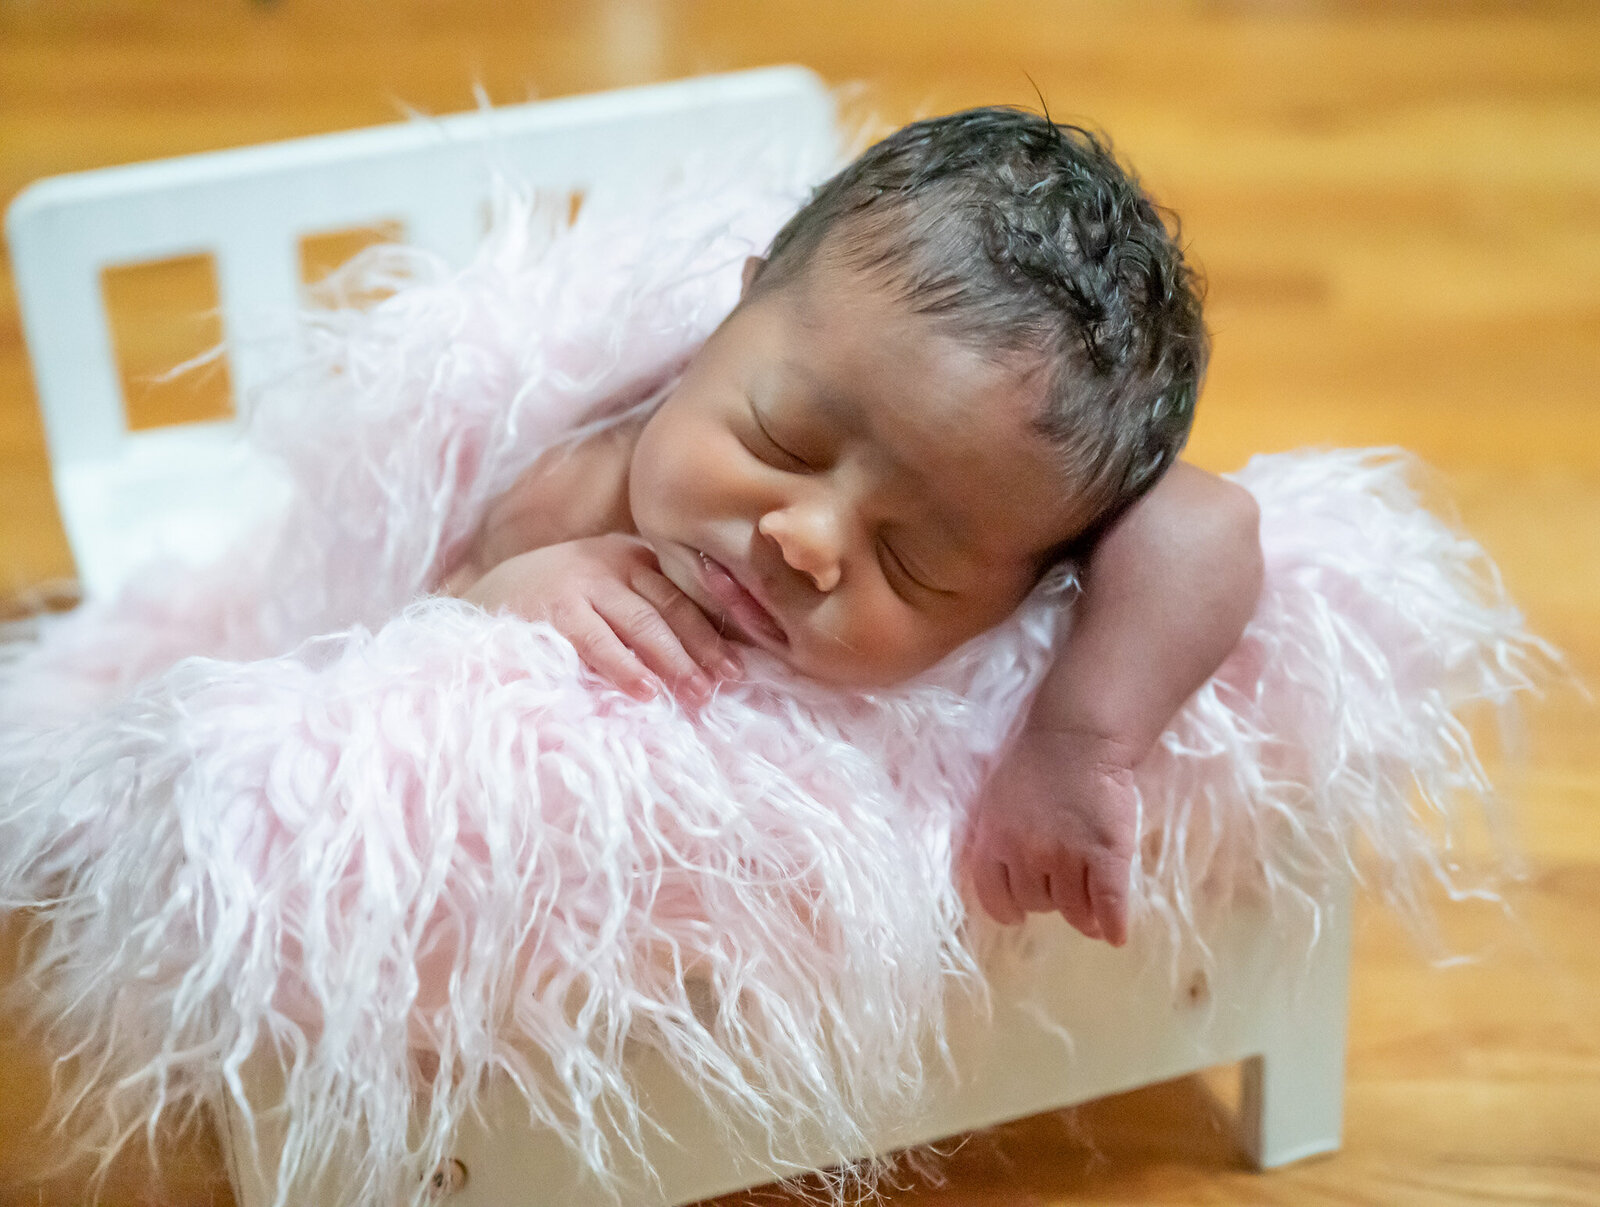 newborn baby girl photographed by Millz Photography in Greenville, SC